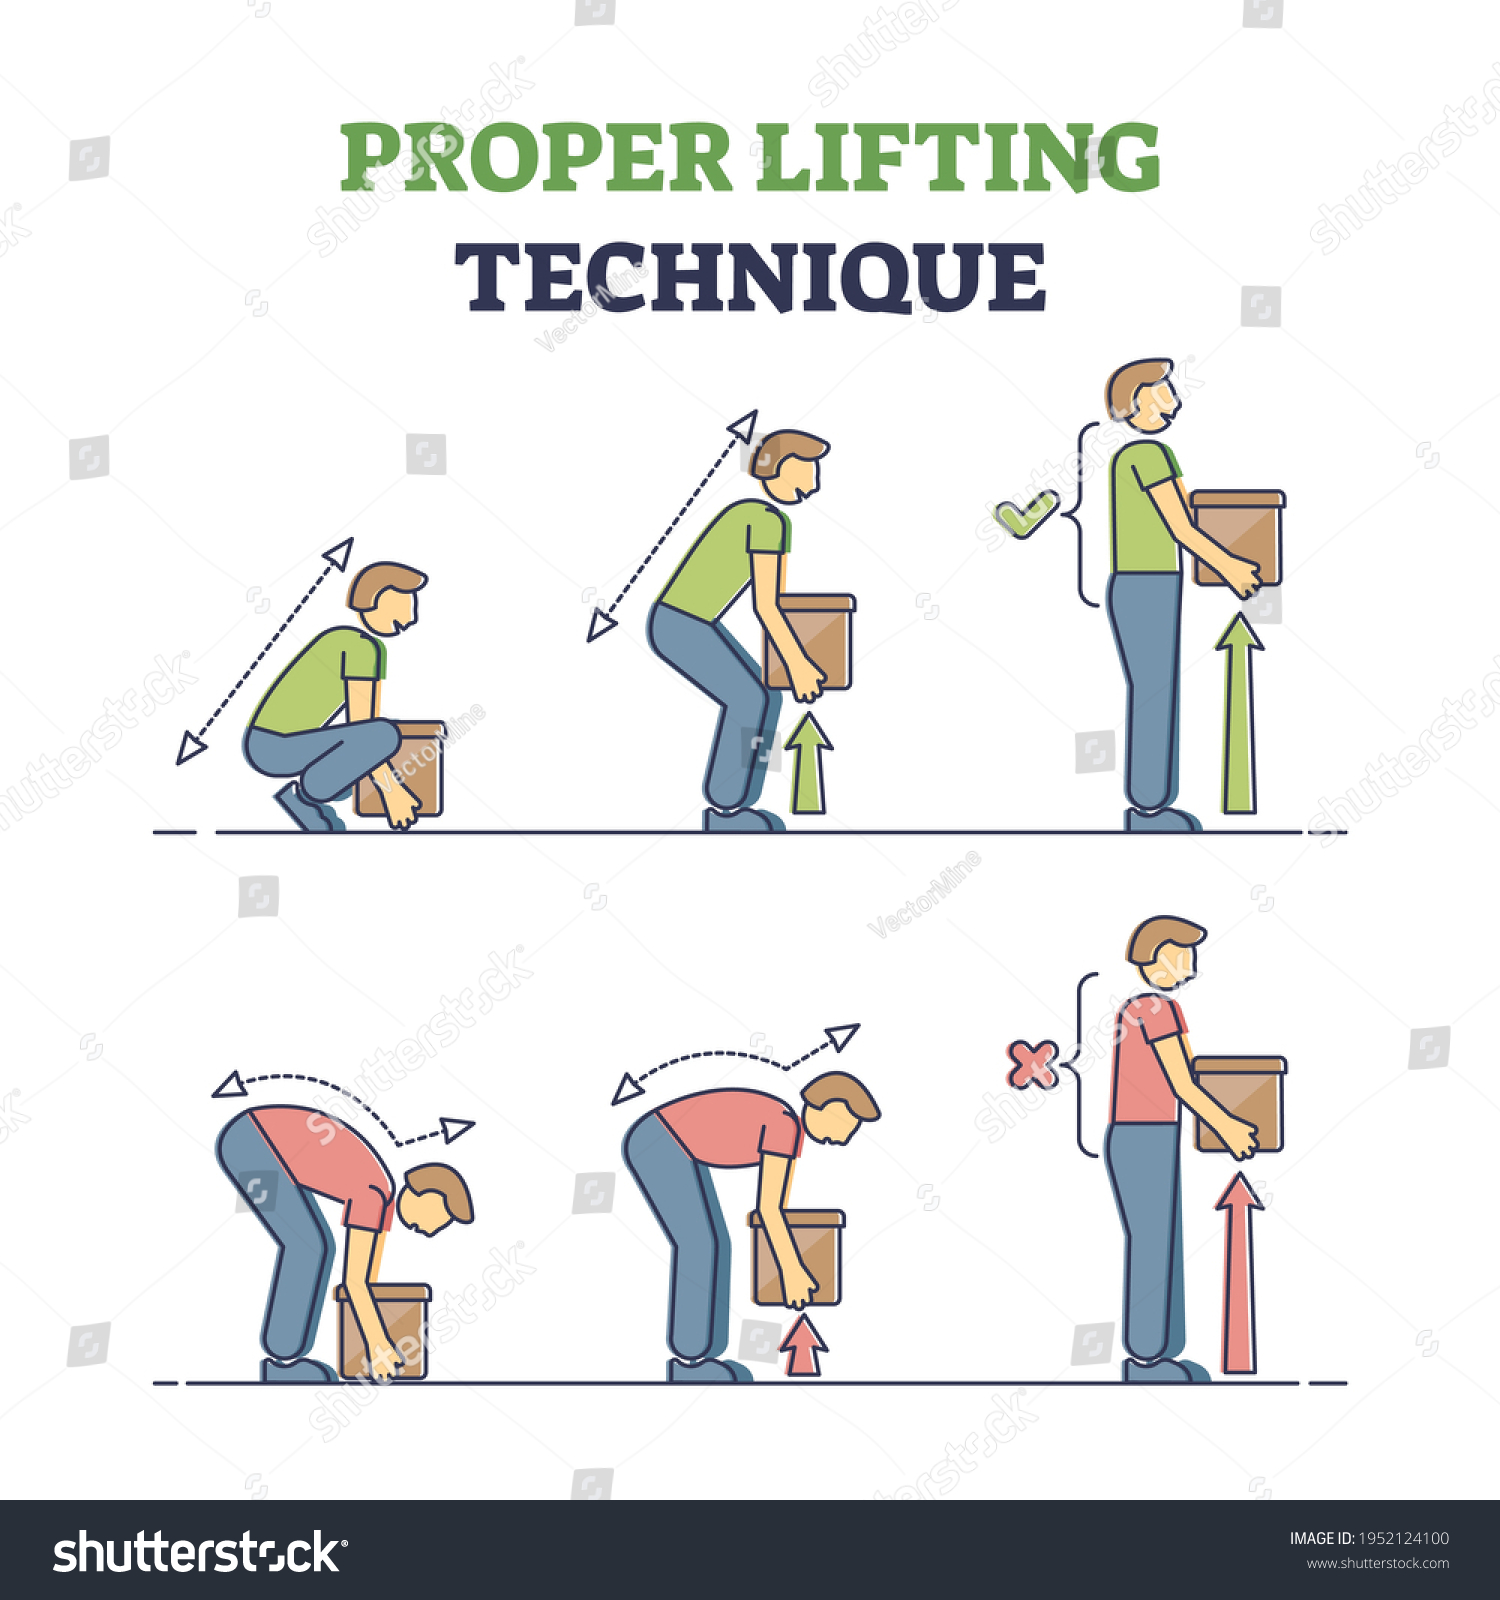 Proper lifting technique with safe heavy weight movement tips outline diagram. Safe back posture angle compared with wrong and incorrect bending to prevent injury, hurt or pain vector illustration. #1952124100